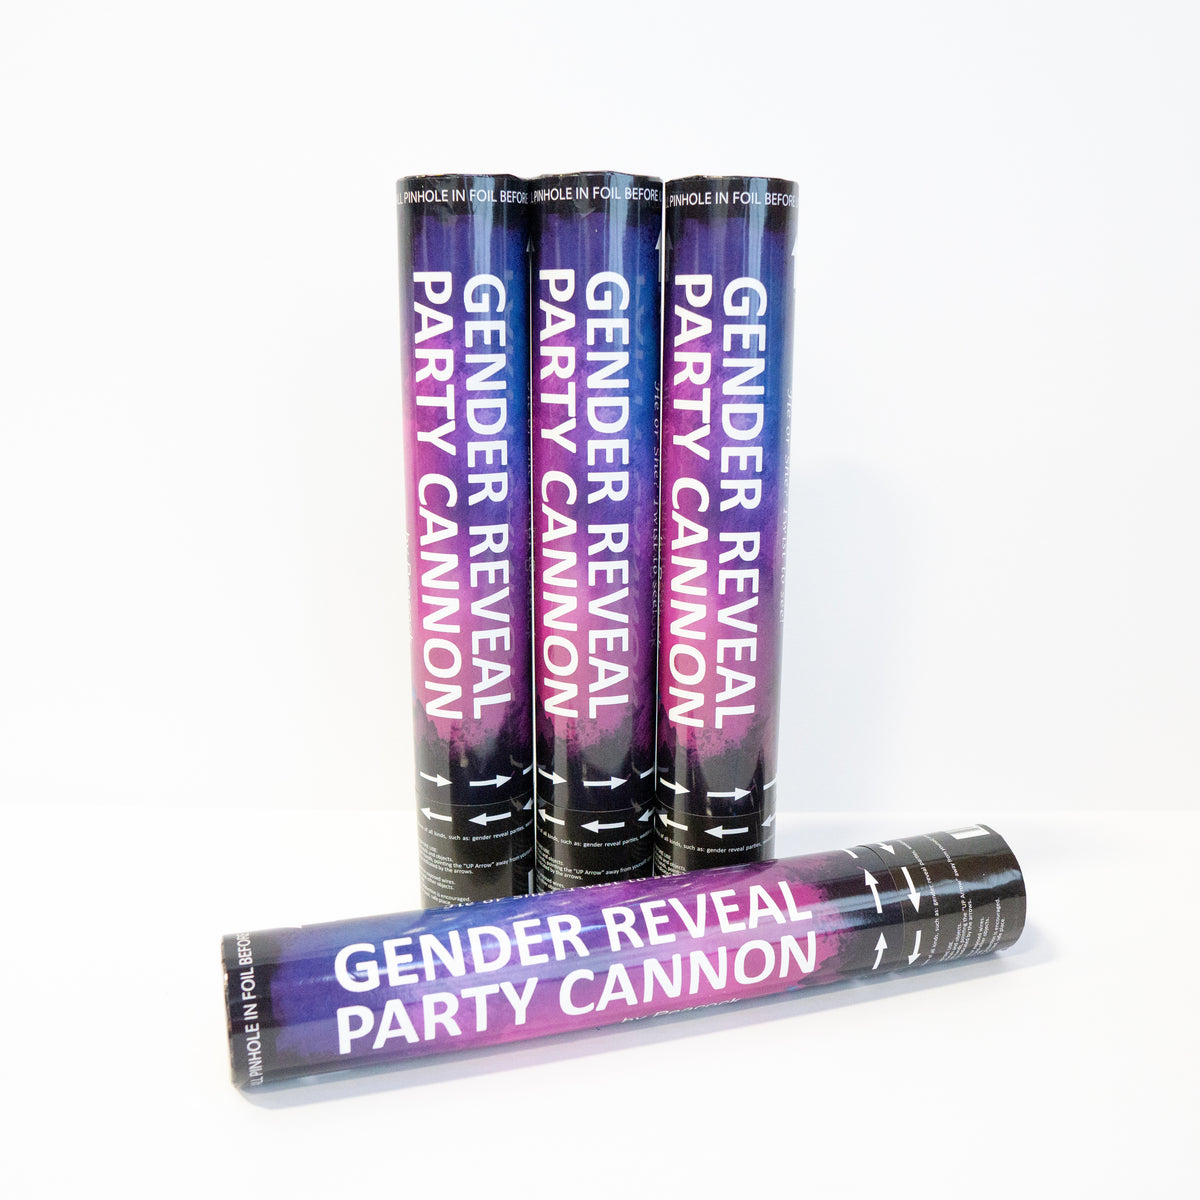 12" Gender Reveal Party Cannon - Powder and Confetti – Peacock Powder